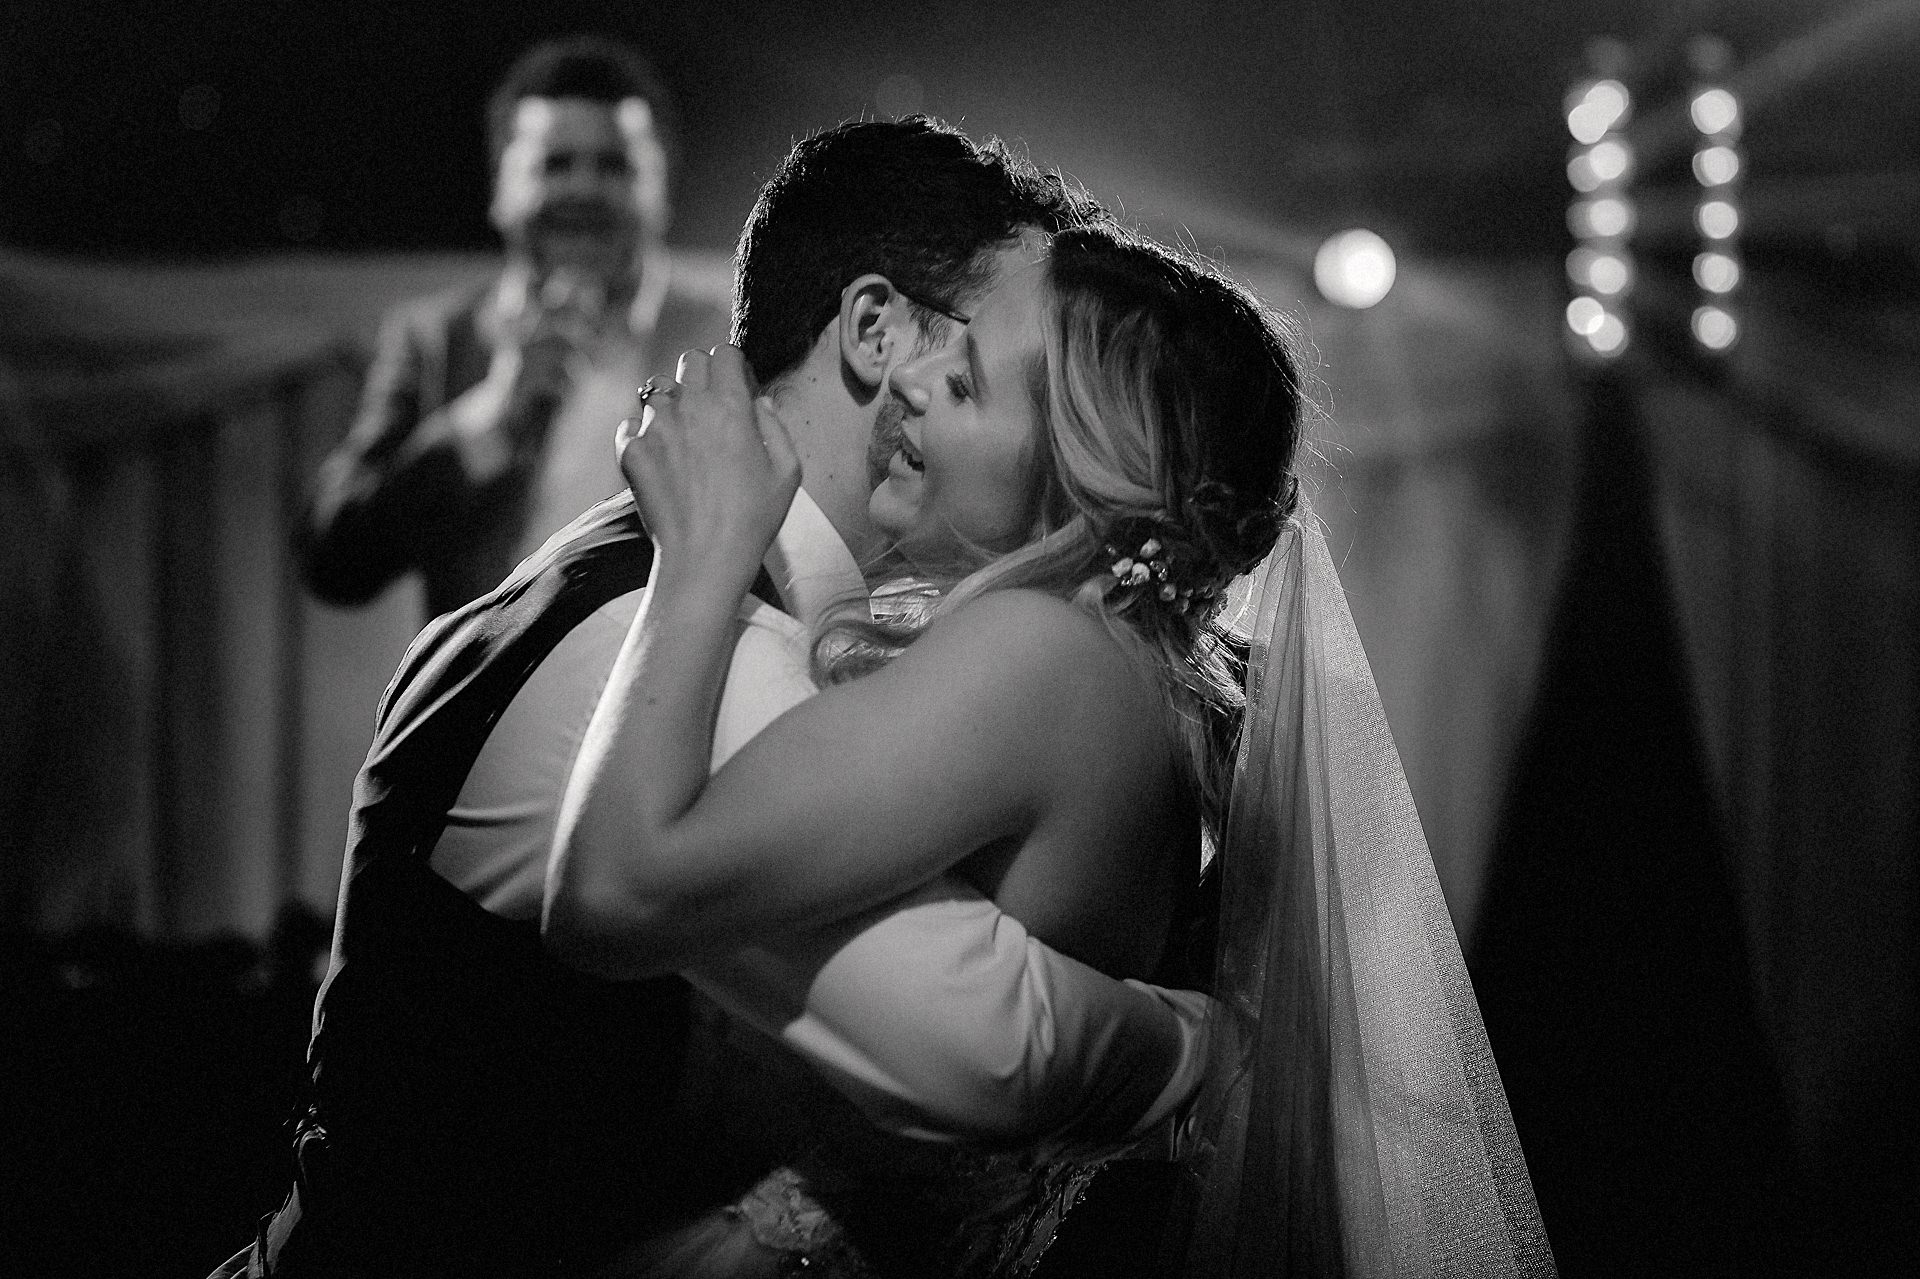 first dance embrace , lionel ritchie in the background